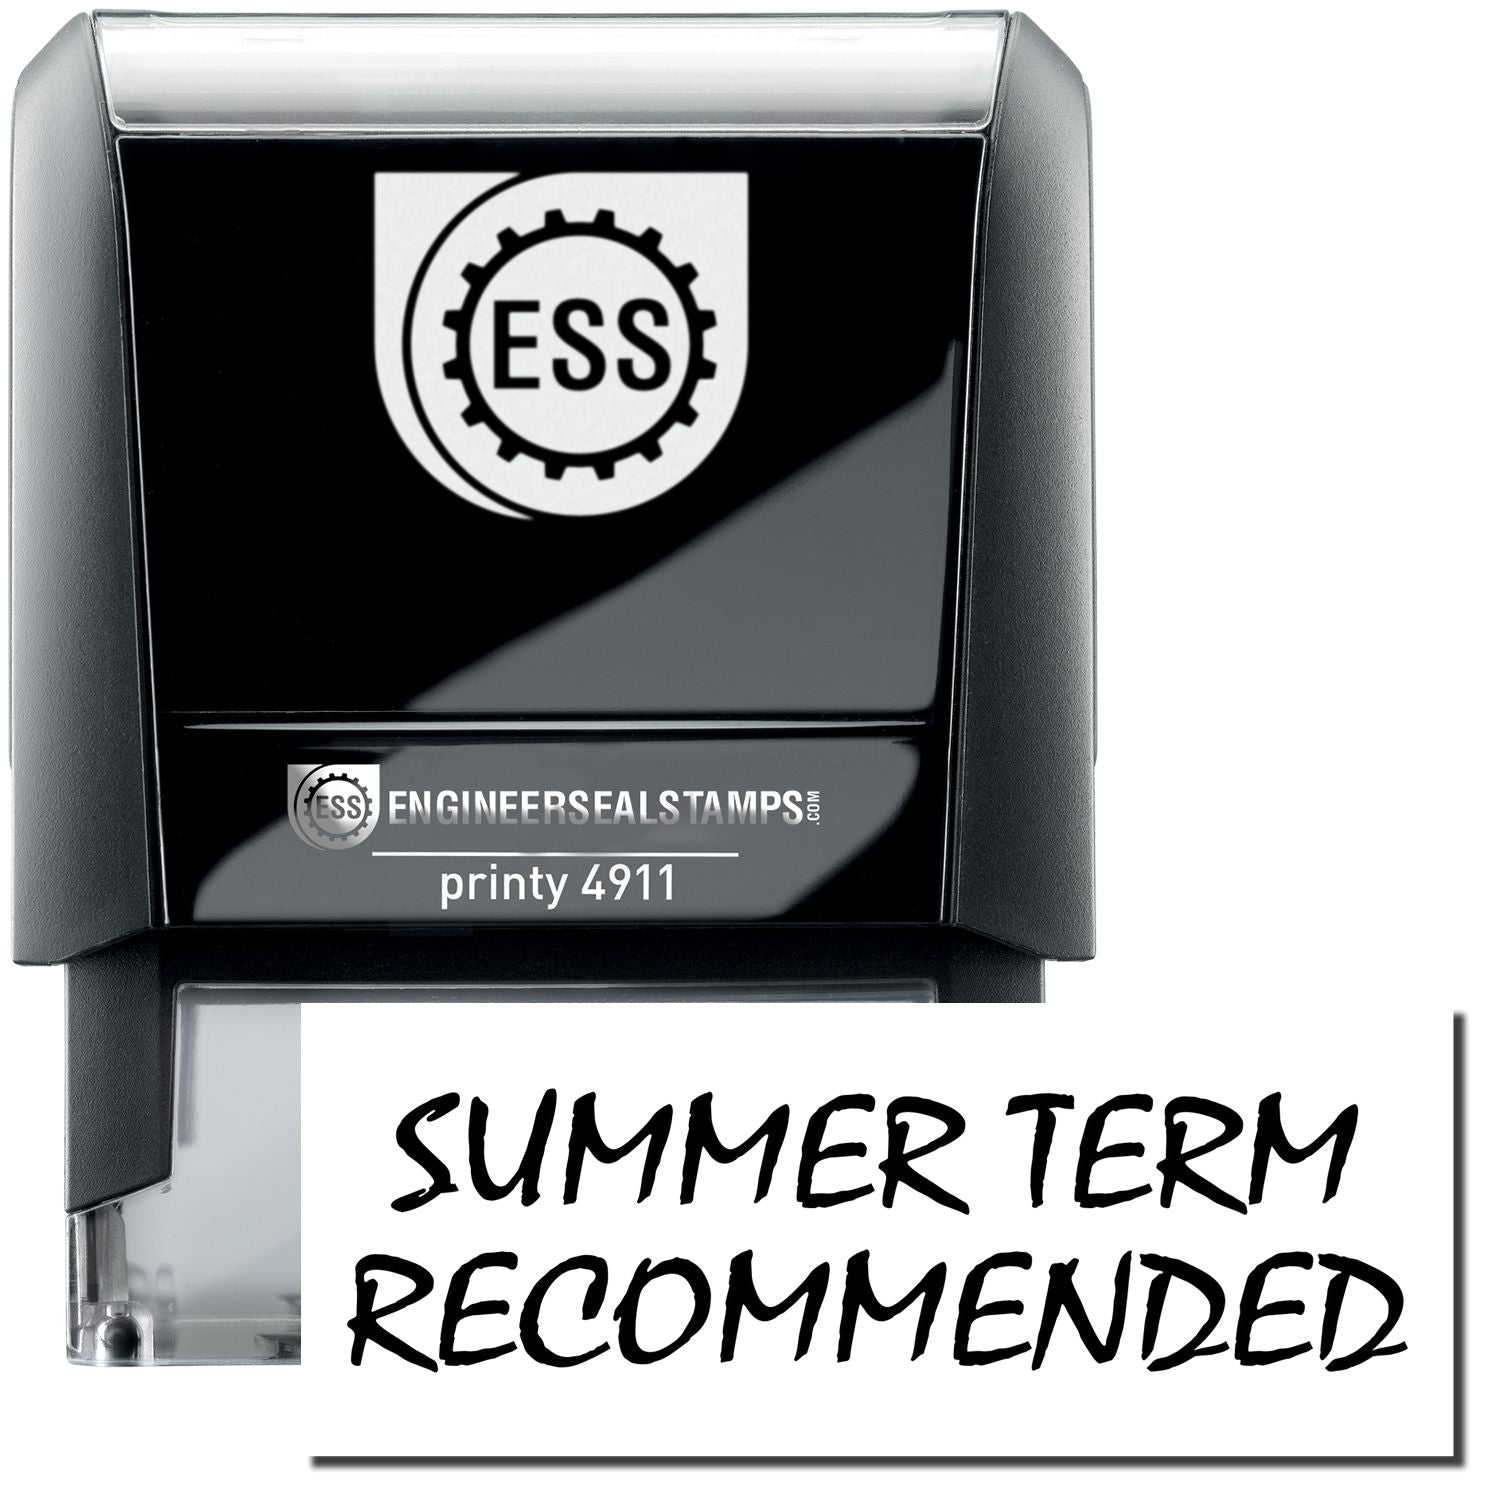 A self-inking stamp with a stamped image showing how the text "SUMMER TERM RECOMMENDED" is displayed after stamping.